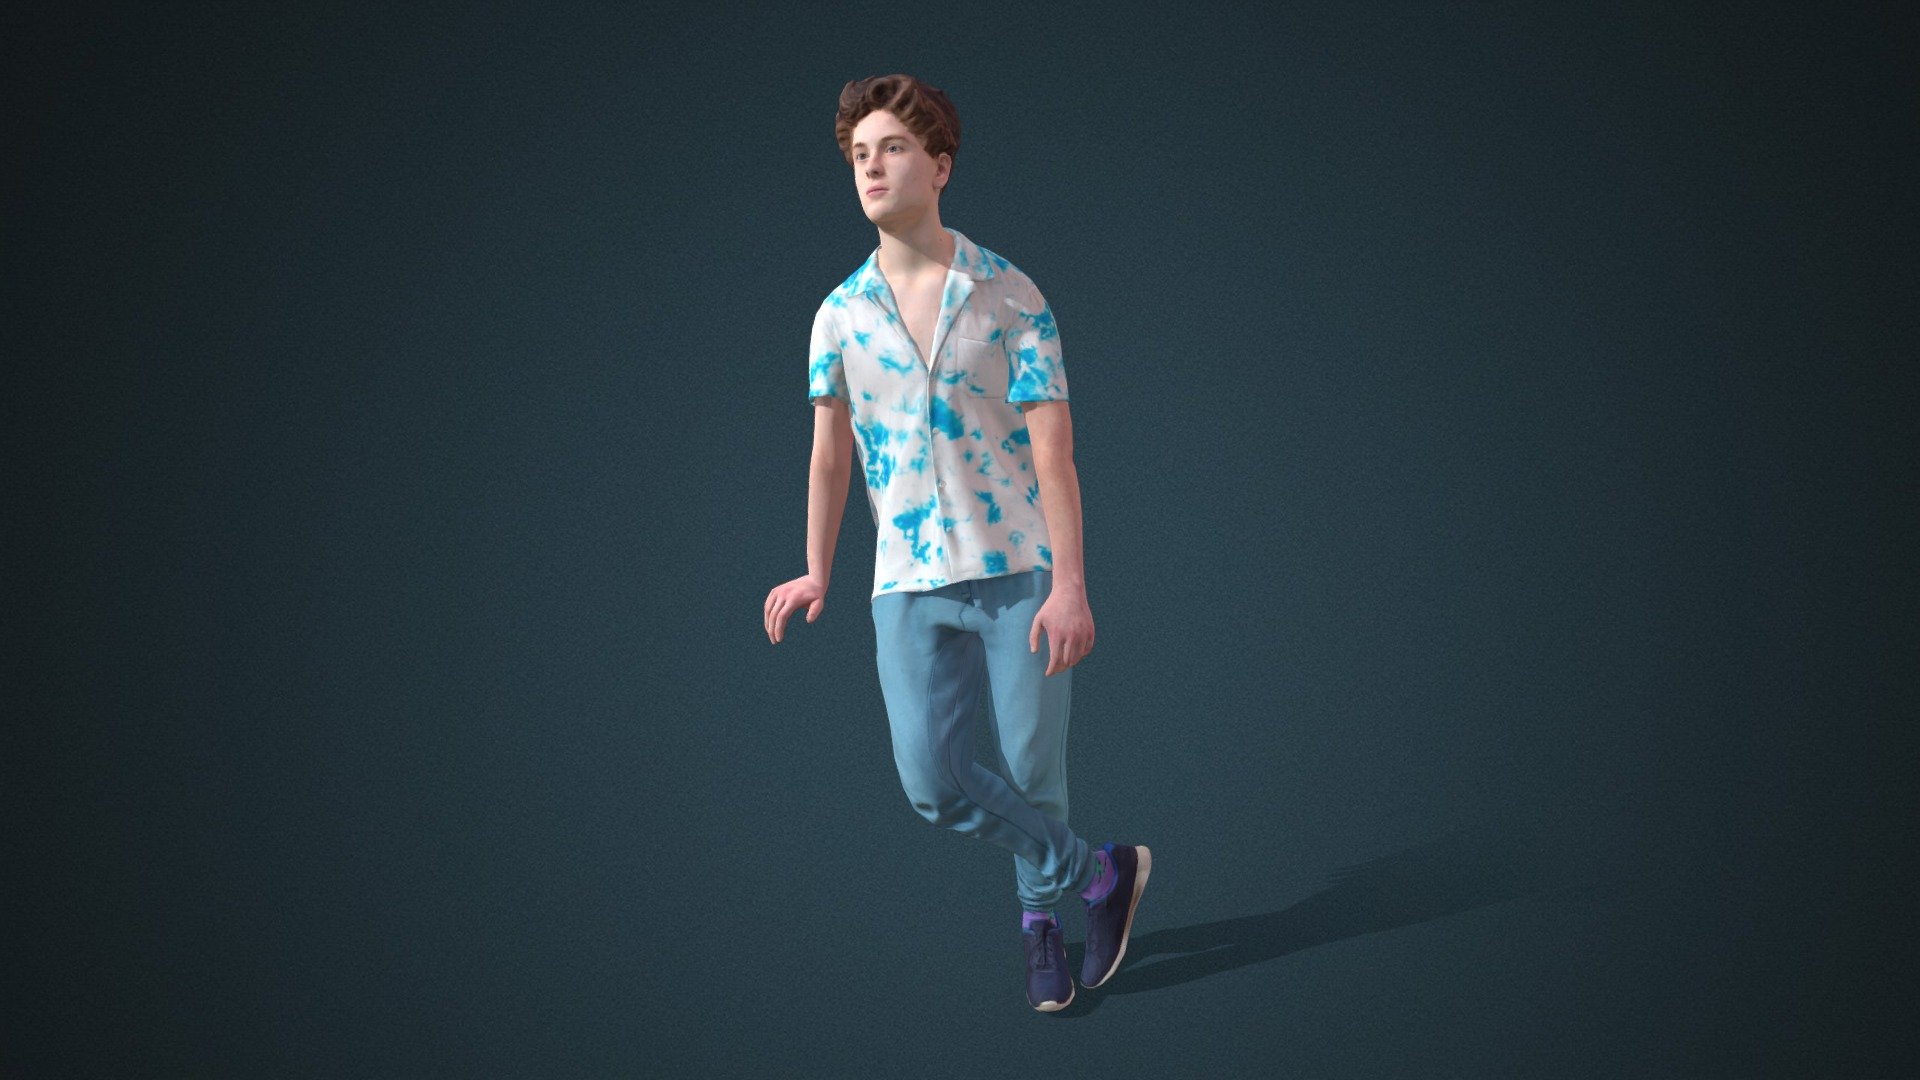 Do you like this model?  Free Download more models, motions and auto rigging tool AccuRIG (Value: $150+) on ActorCore
 

This model includes 2 mocap animations:Modern_F_Look around,Modern_F_Walk. Get more free motions

Design for high-performance crowd animation.

Buy full pack and Save 20%+: Young Fashion Vol.4


SPECIFICATIONS

✔ Geometry : 7K~10K Quads, one mesh

✔ Material : One material with changeable colors.

✔ Texture Resolution : 4K

✔ Shader : PBR, Diffuse, Normal, Roughness, Metallic, Opacity

✔ Rigged : Facial and Body (shoulders, fingers, toes, eyeballs, jaw)

✔ Blendshape : 122 for facial expressions and lipsync

✔ Compatible with iClone AccuLips, Facial ExPlus, and traditional lip-sync.


About Reallusion ActorCore

ActorCore offers the highest quality 3D asset libraries for mocap motions and animated 3D humans for crowd rendering 3d model